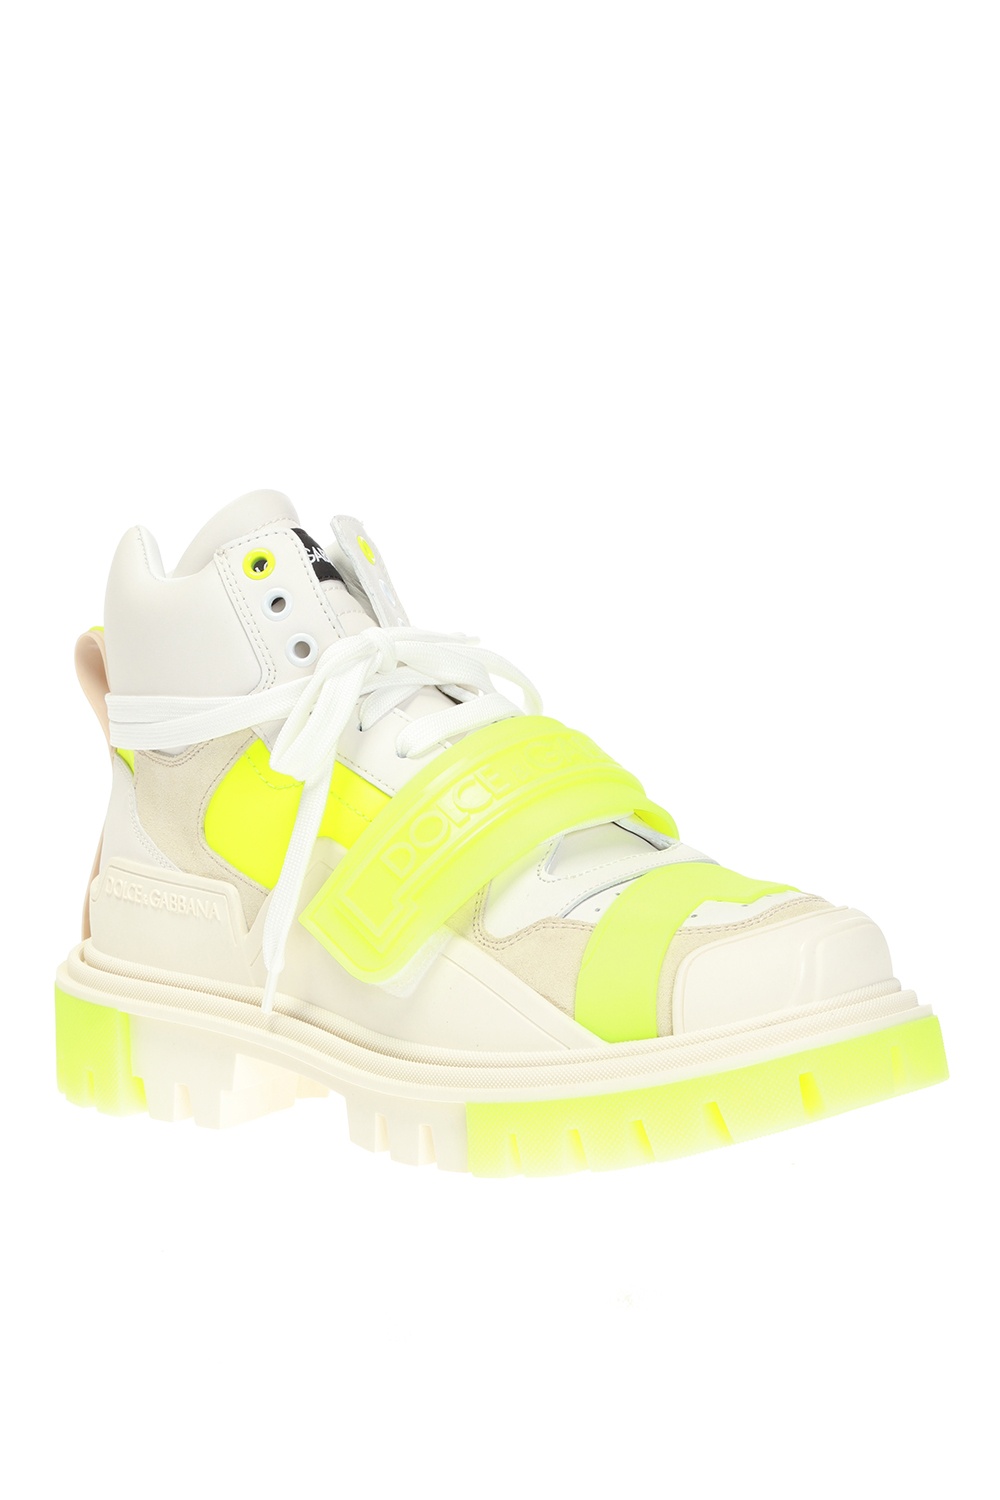 Dolce And Gabbana Shoes Lime Green Deals, SAVE 44% 